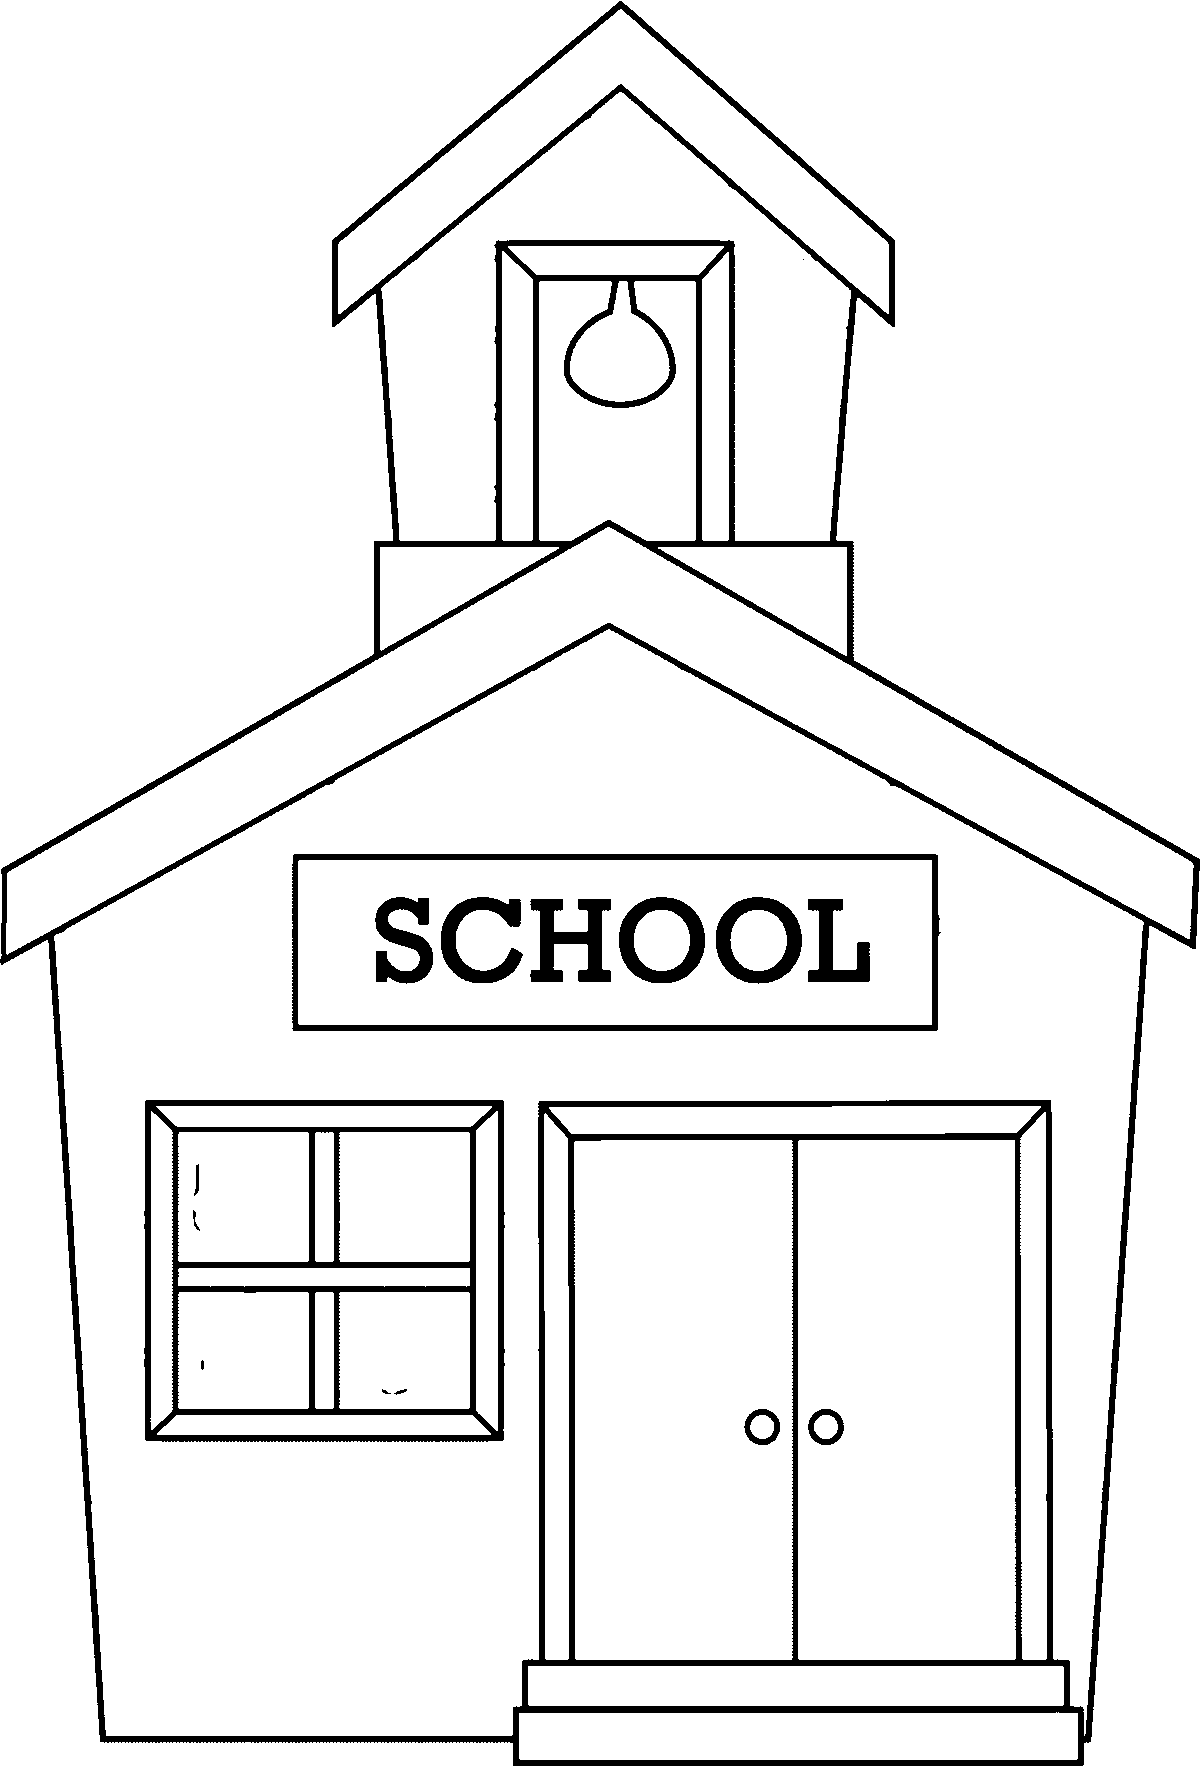 coloring-page-of-a-school-building-coloring-home